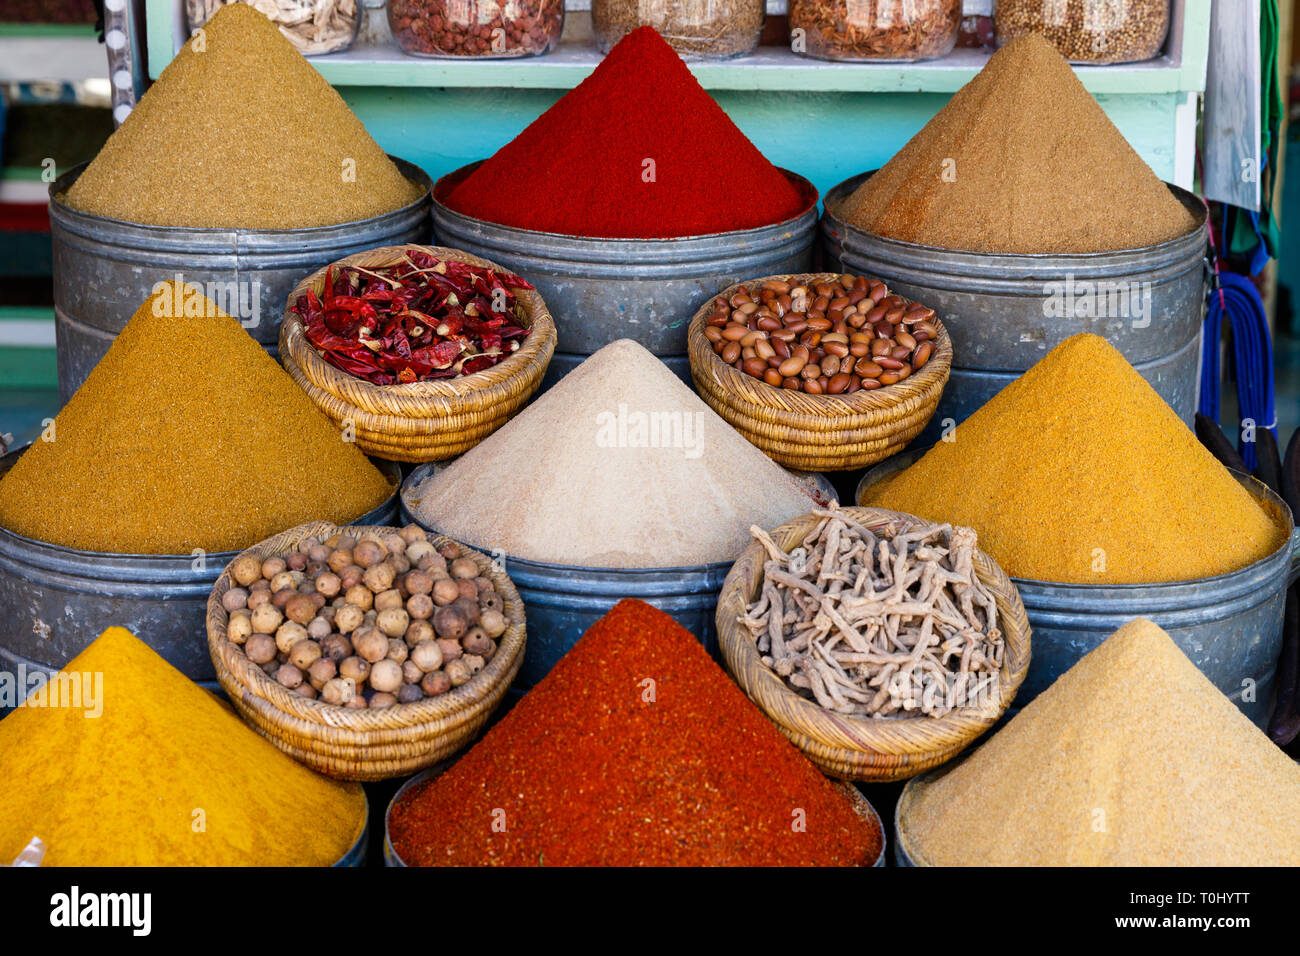 Colorful cooking Spices and flower in traditional local medina bazaar market in Marrakesh, Morocco Stock Photo